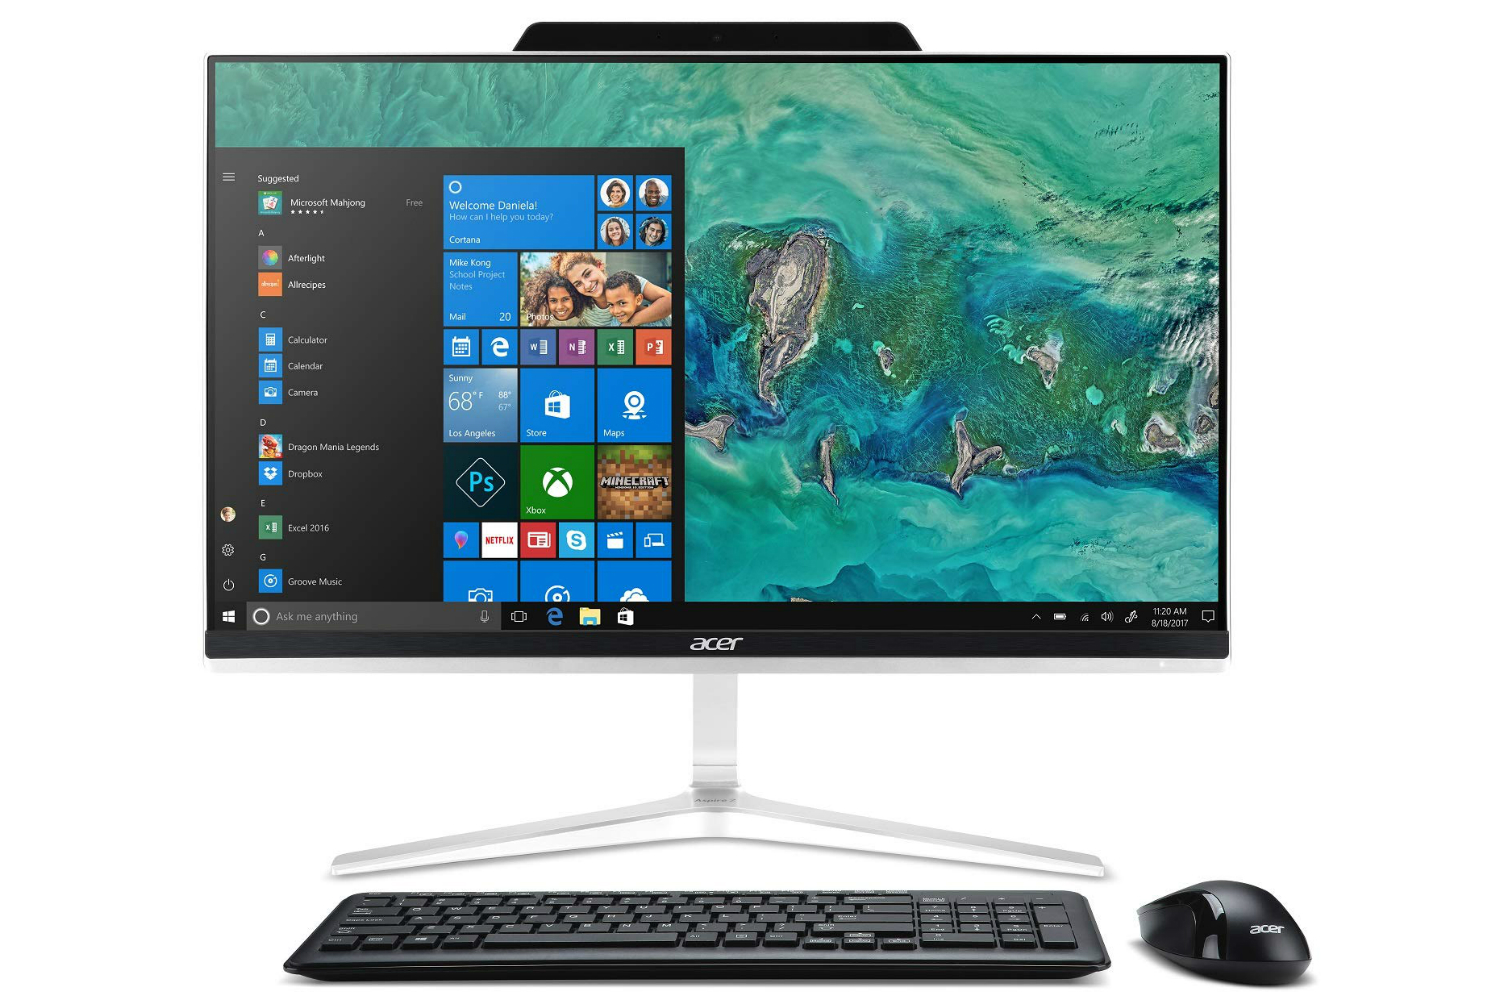 amazon slashes prices on acer laptops desktops monitors and gaming gear aspire z24 890 ur11 aio touch desktop